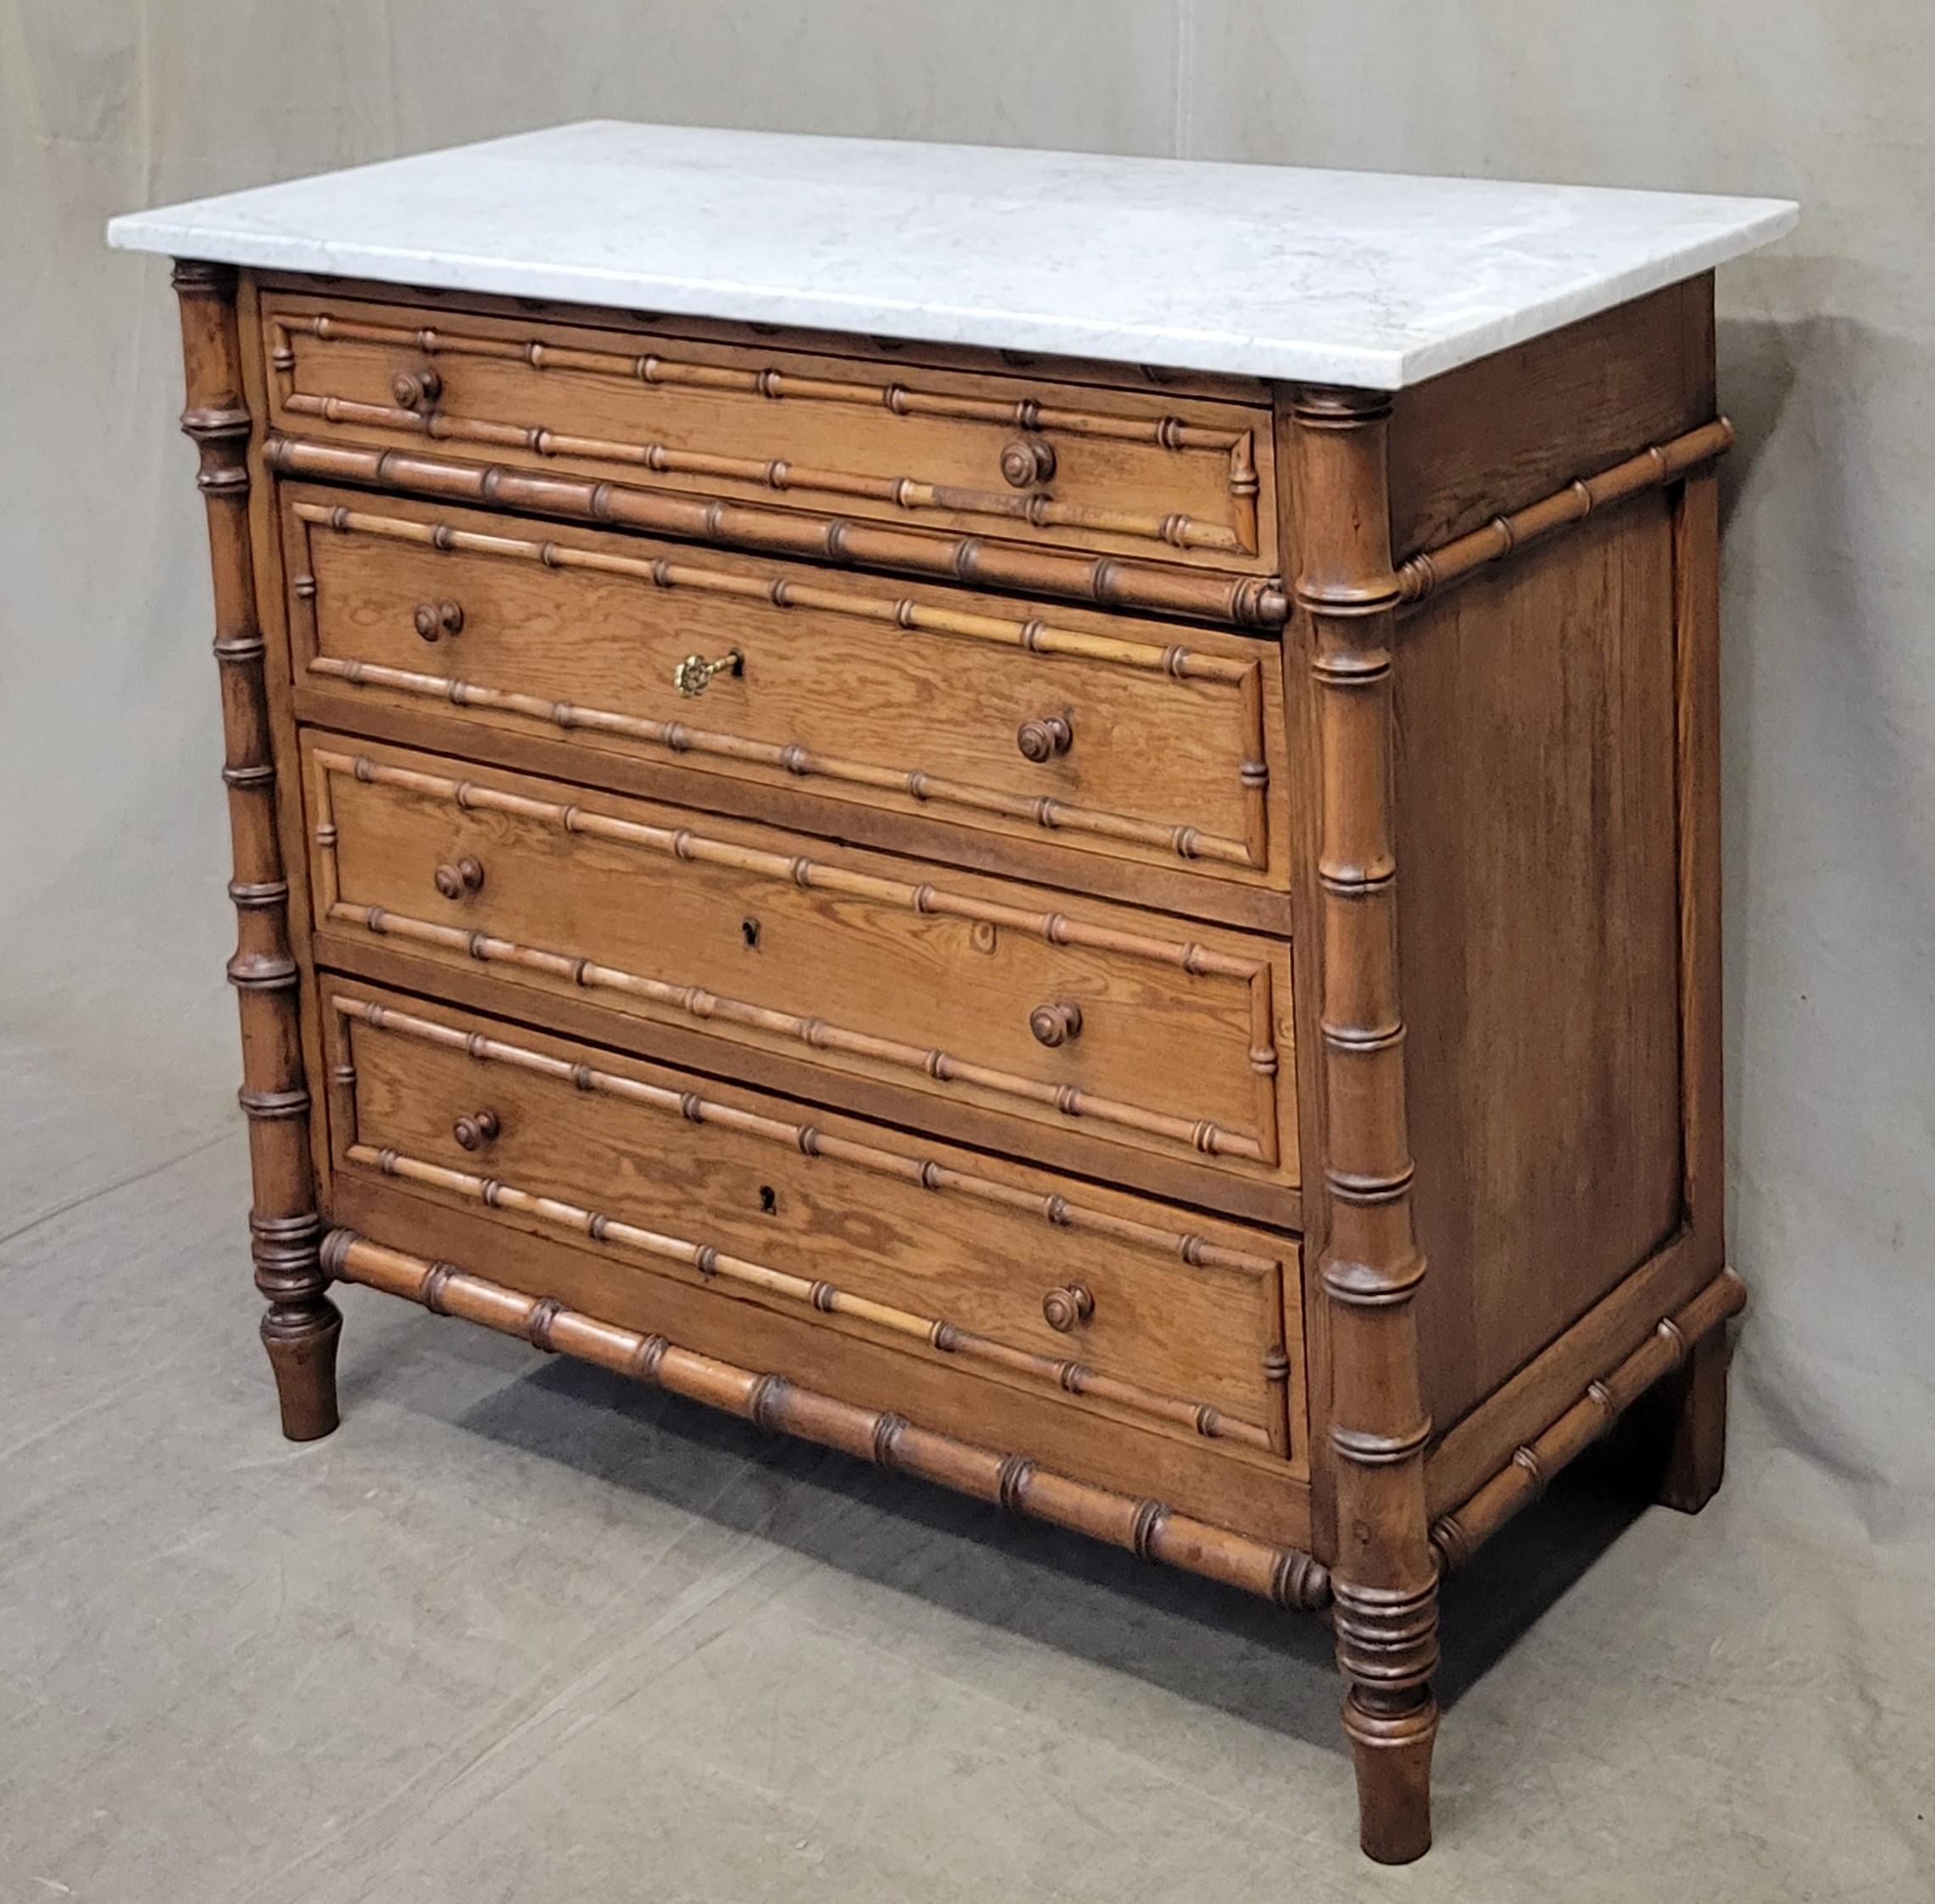 An absolutely beautiful antique French faux bamboo pitch pine and cherry dresser chest of drawers with old Carrera marble top and matching mirror. Original turned wood knobs are intact. Drawer fronts and side panels are solid pitch pine; posts and